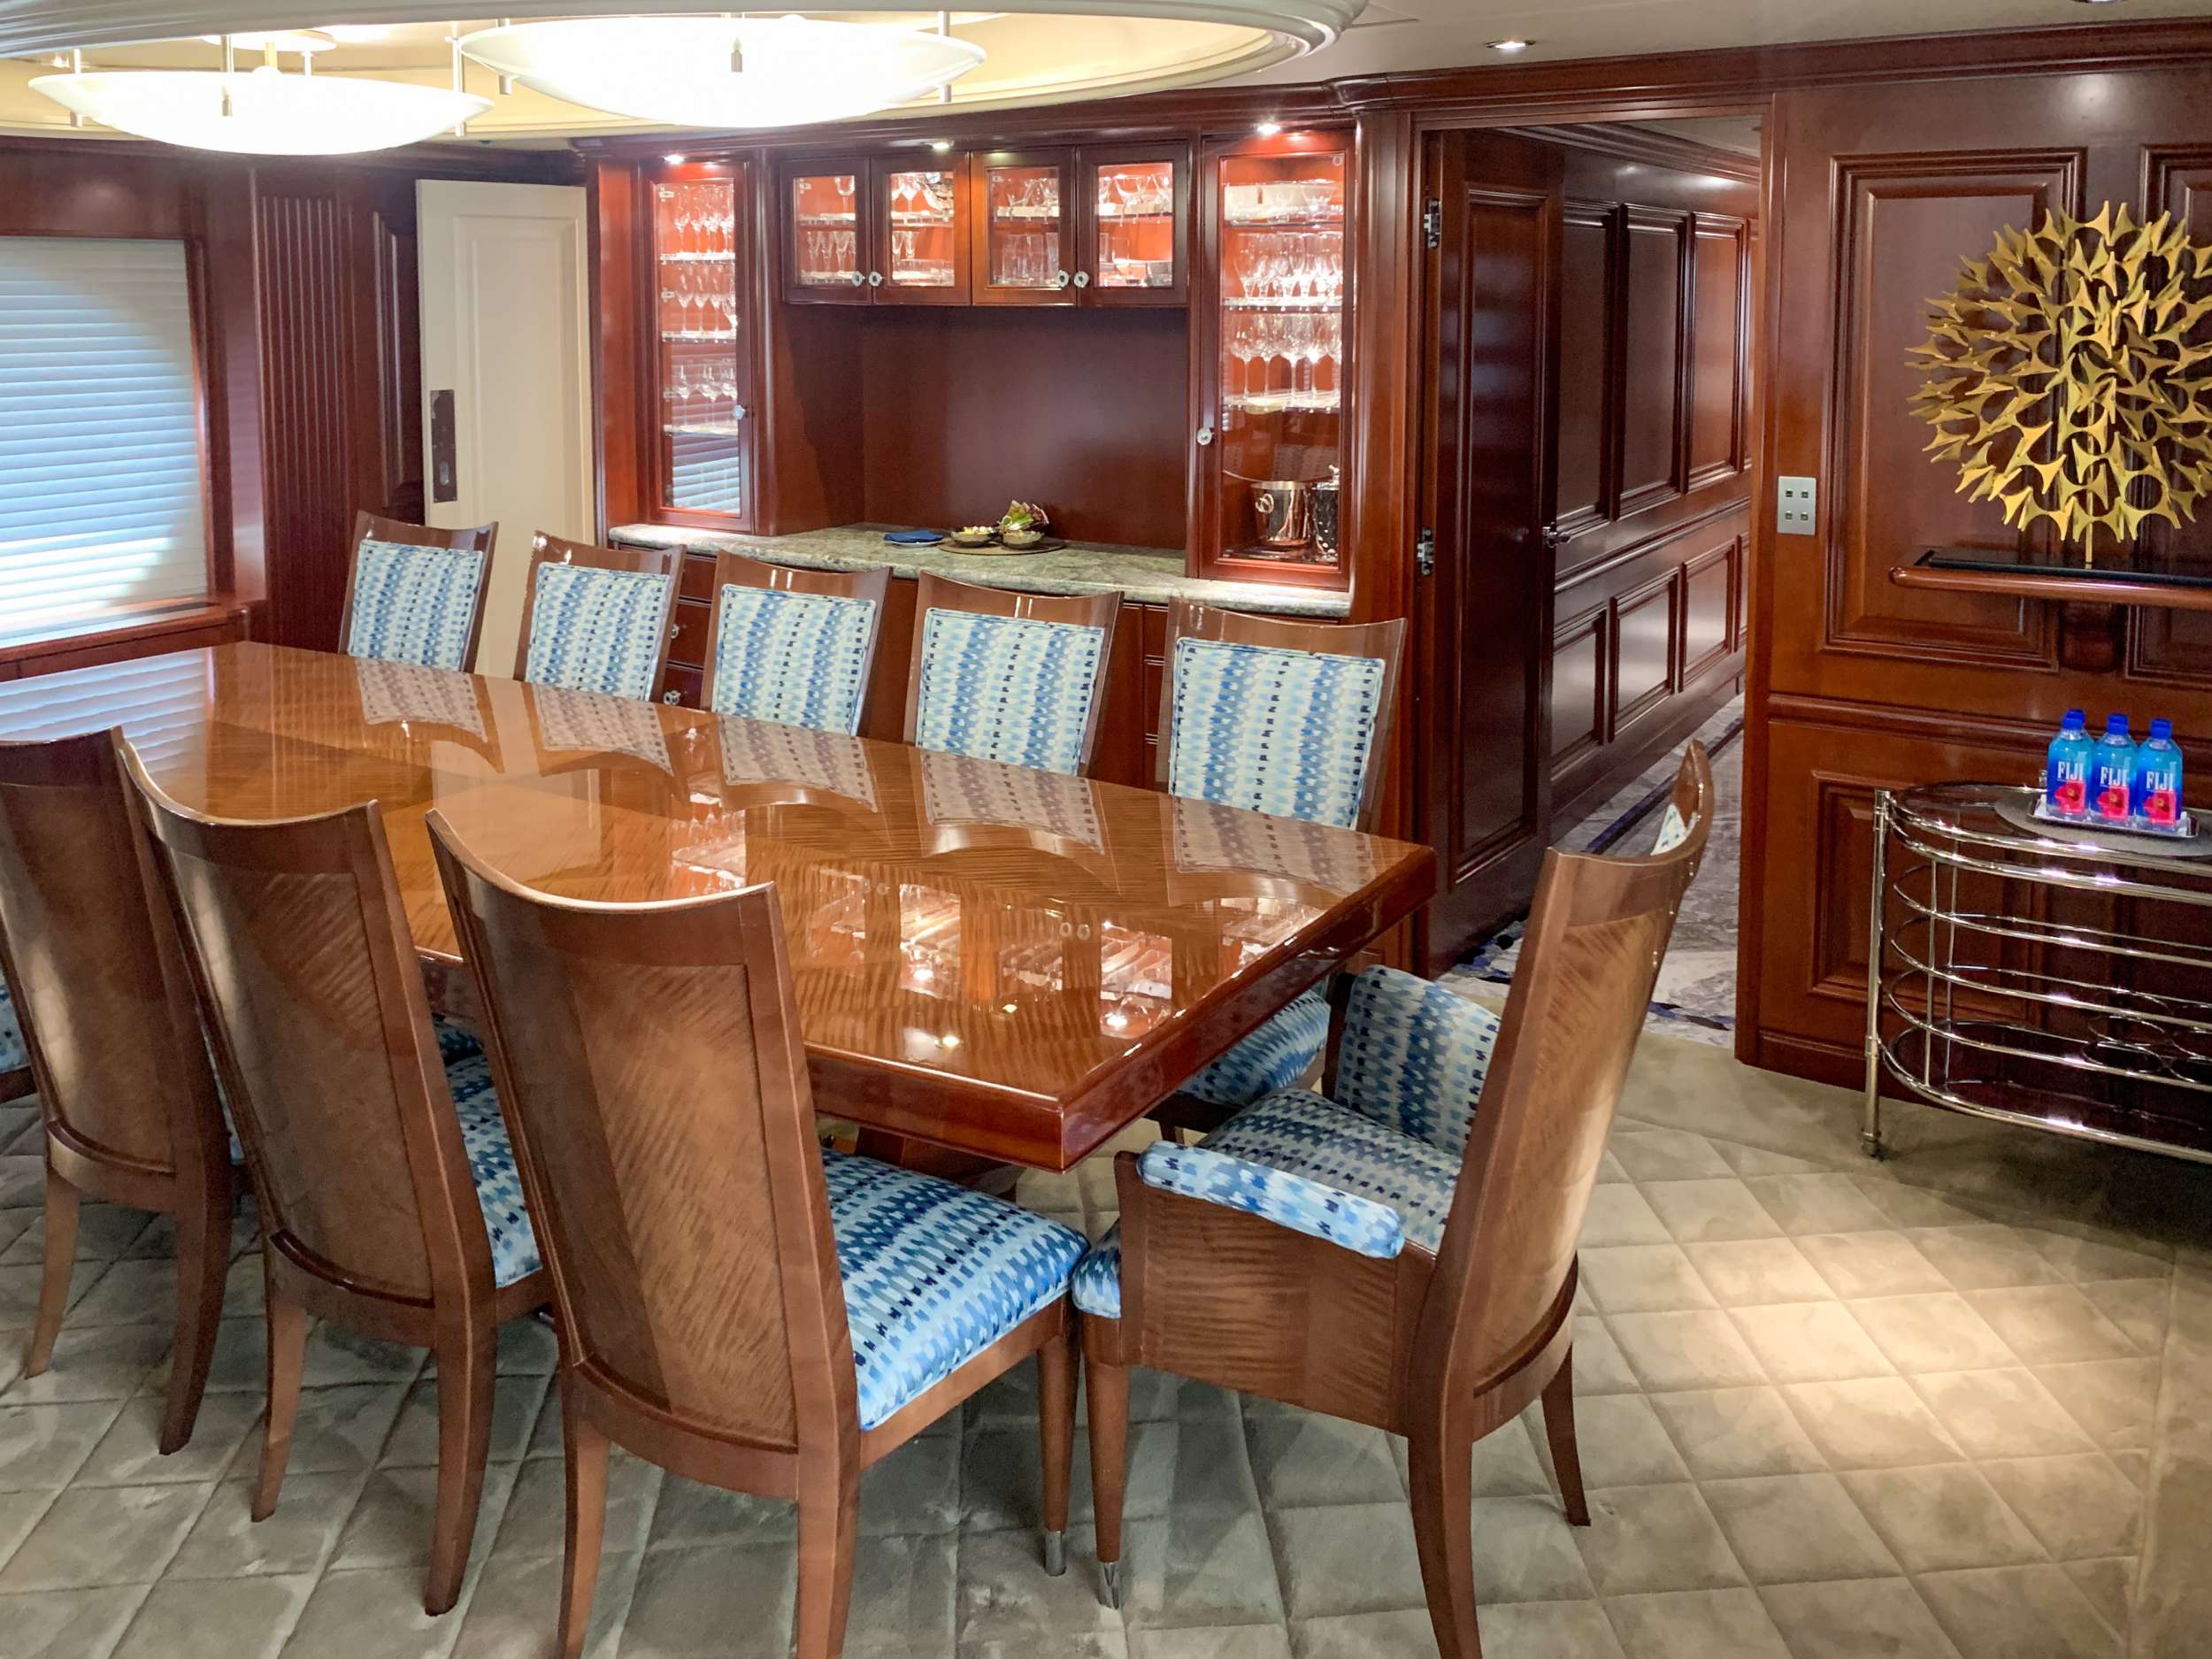 ARTEMIS Yacht Charter - Formal Dining